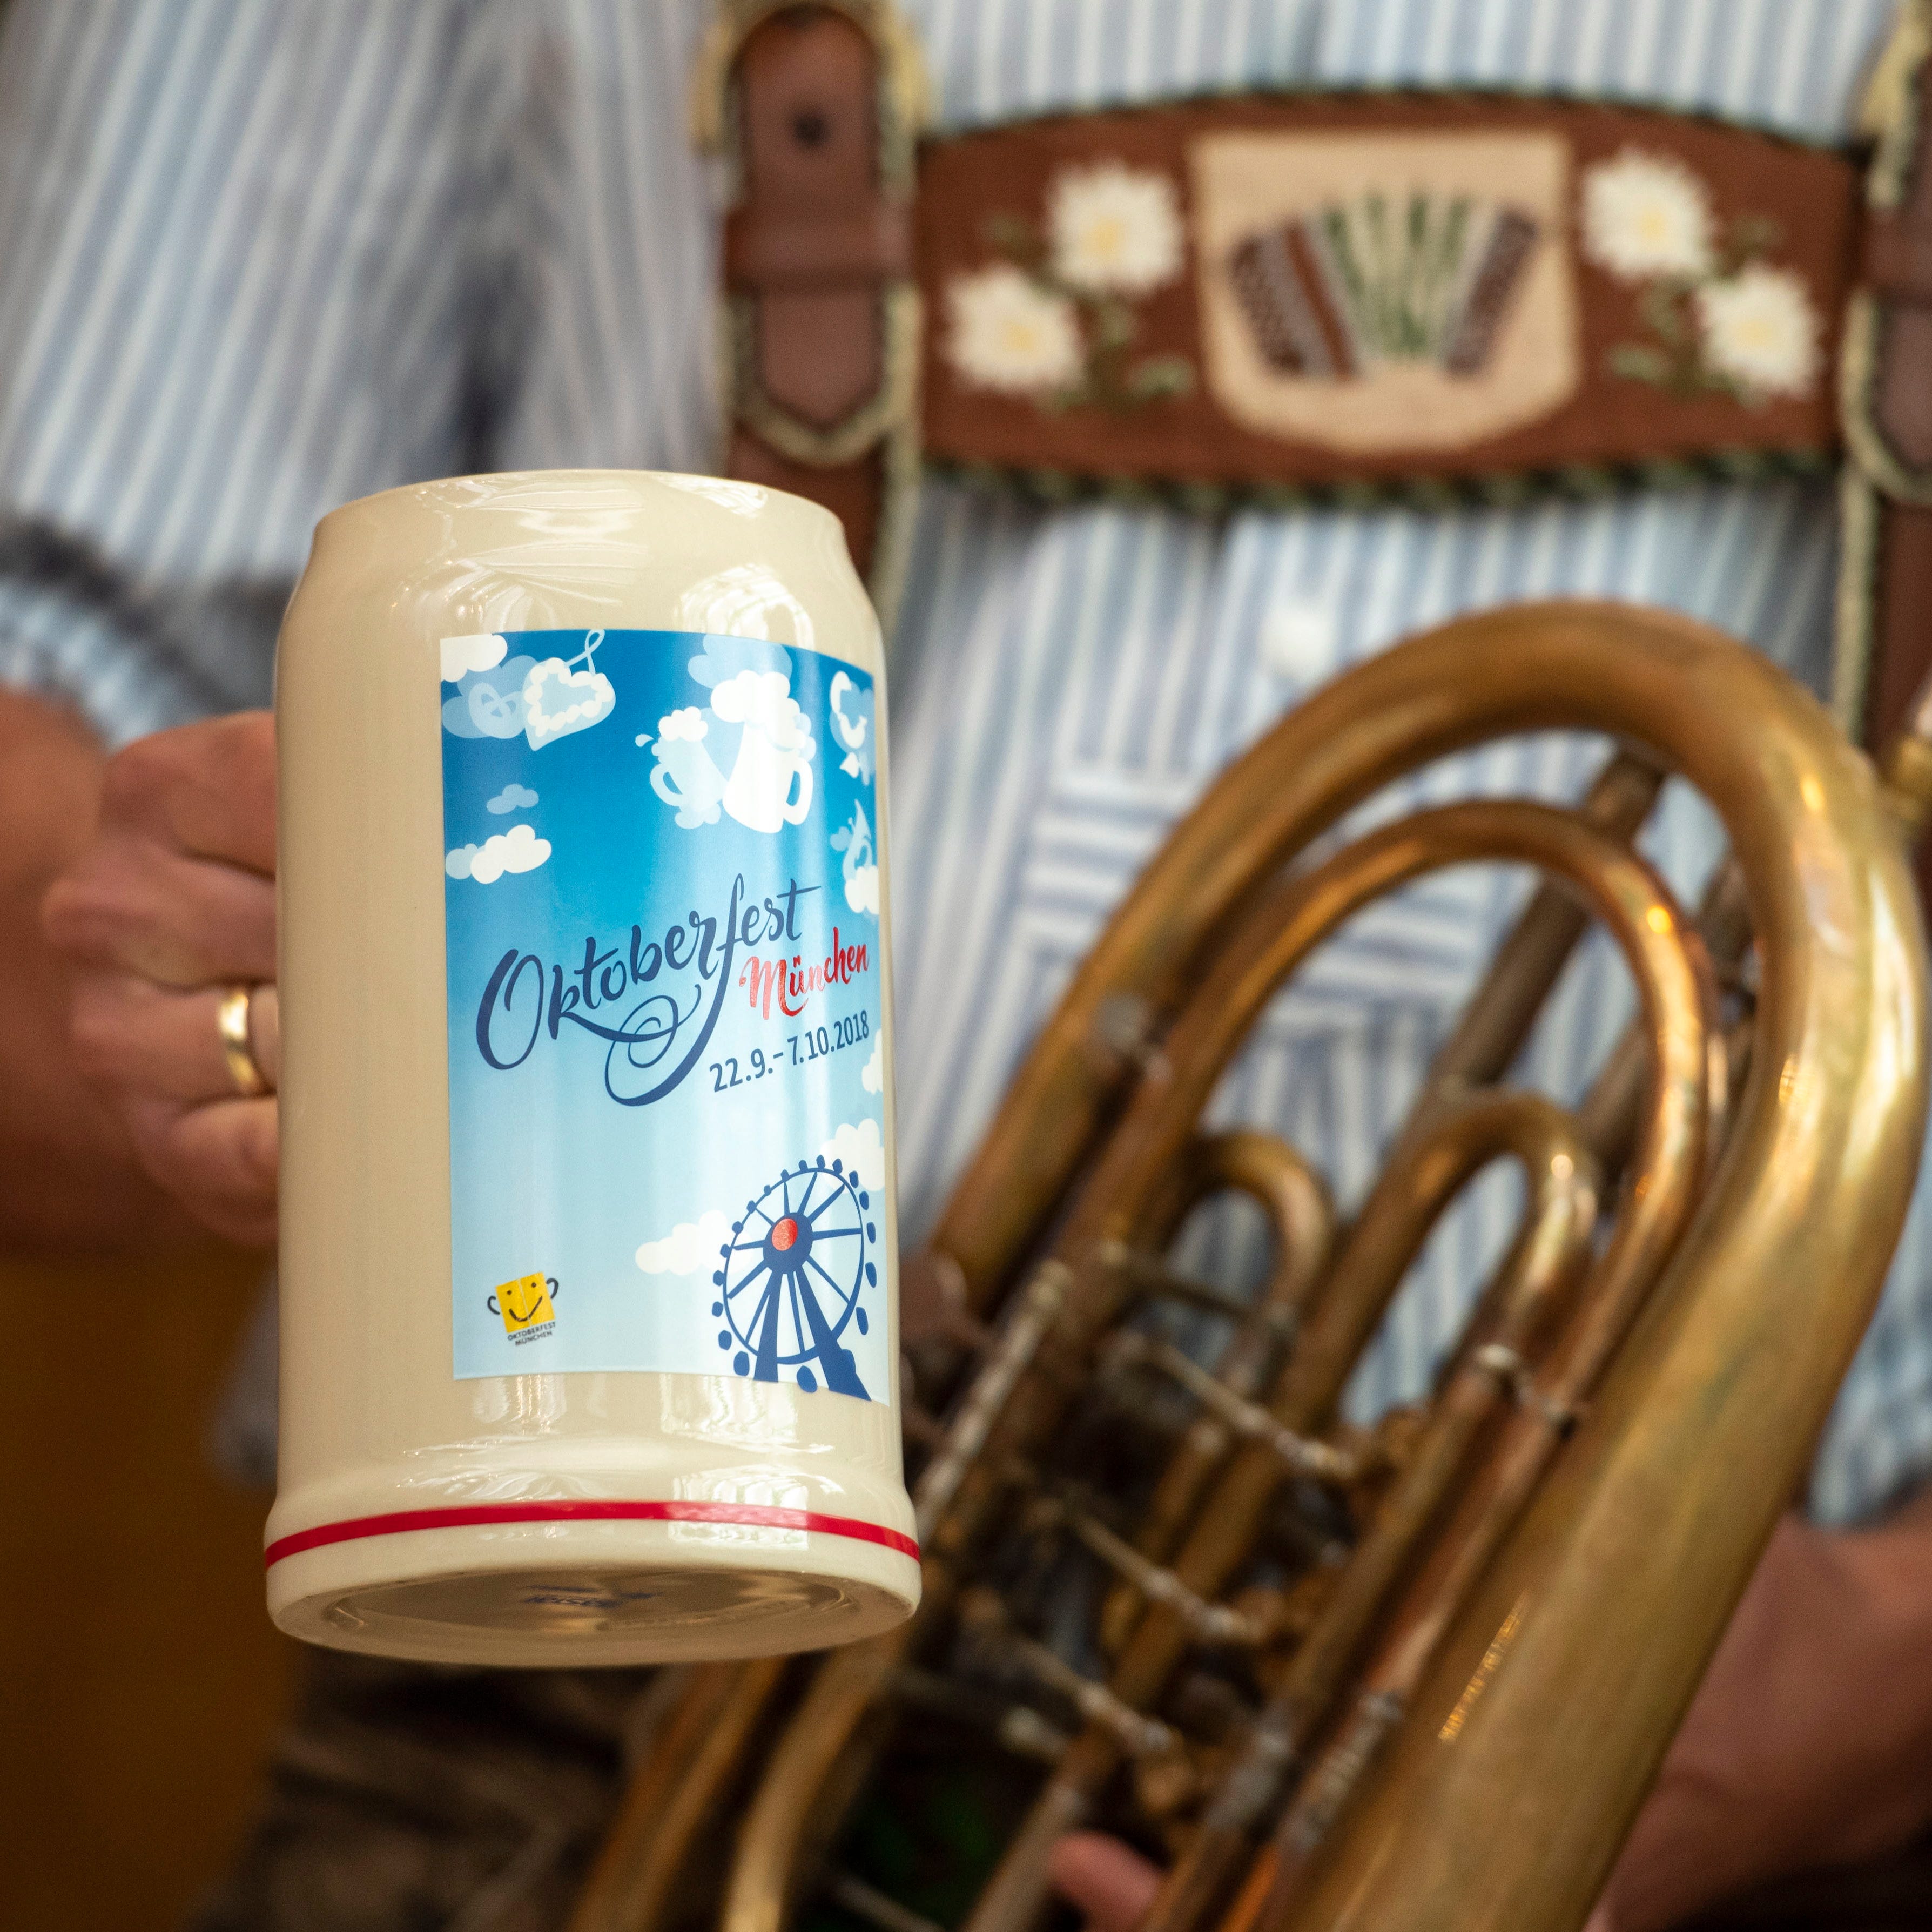 A musician presents the official Oktoberfest beer mug for 2018 on the Oktoberfest grounds in Munich. The World's largest beer festival will be held from Sept. 22 to Oct. 7.